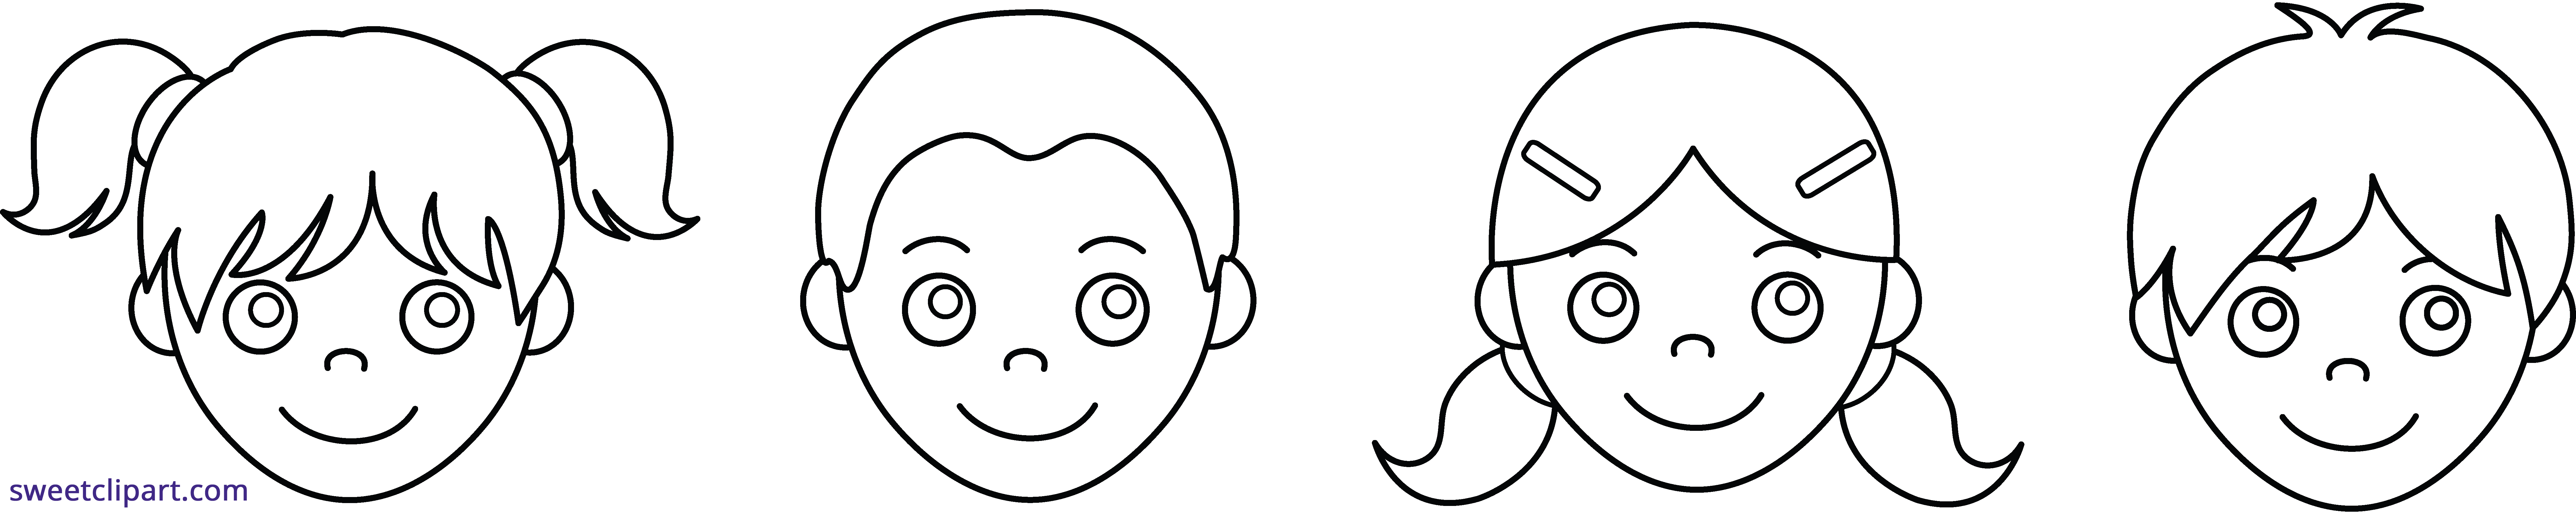 Kids faces outline sweet. Fries clipart face